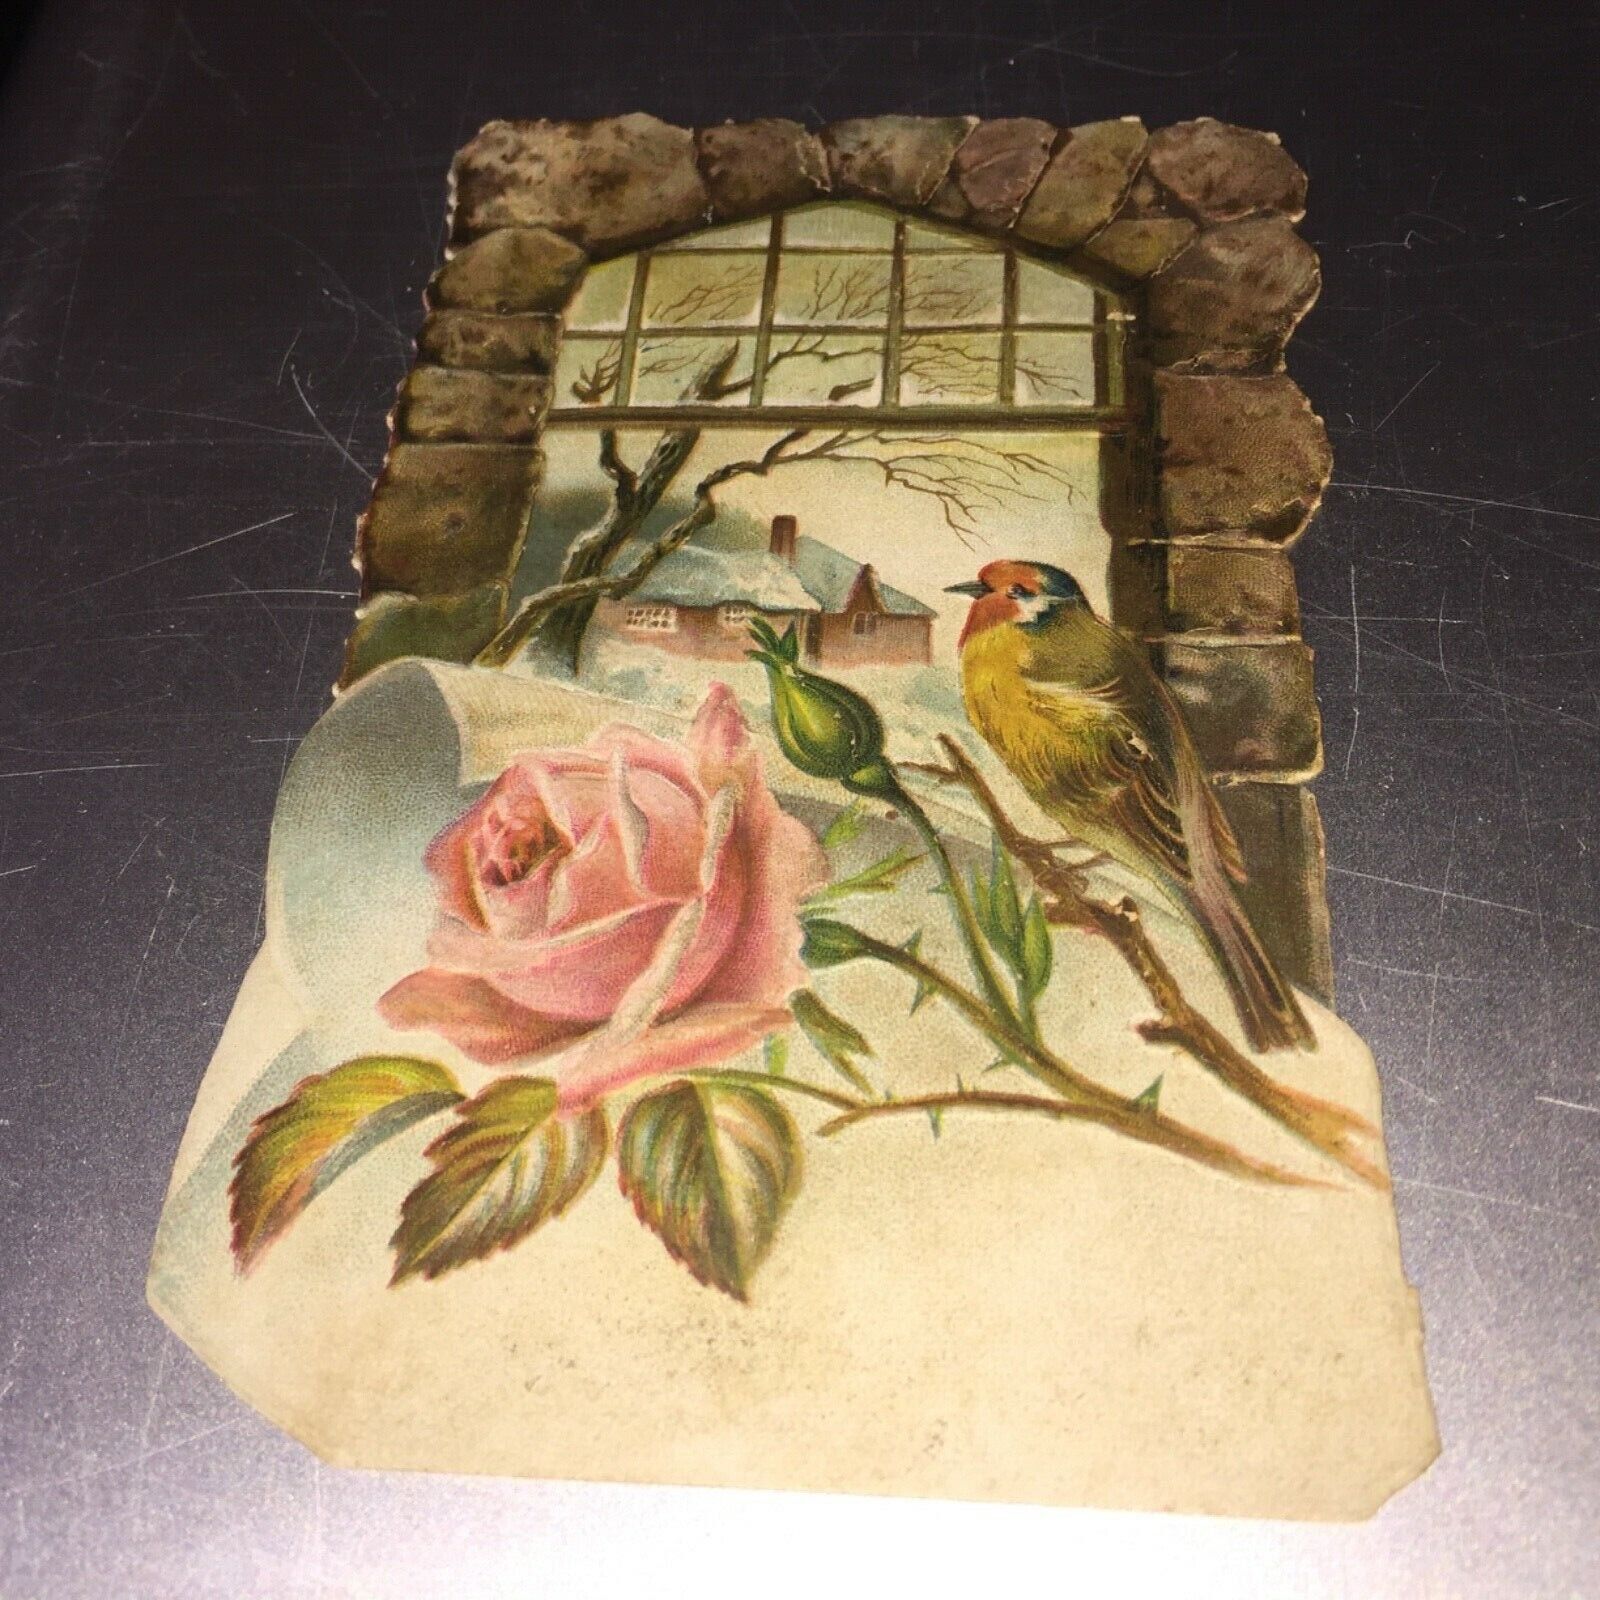 VICTORIAN HOME WITH A BIRD LOOKING OUT A WINDOW BY A PINK FLOWER CARD